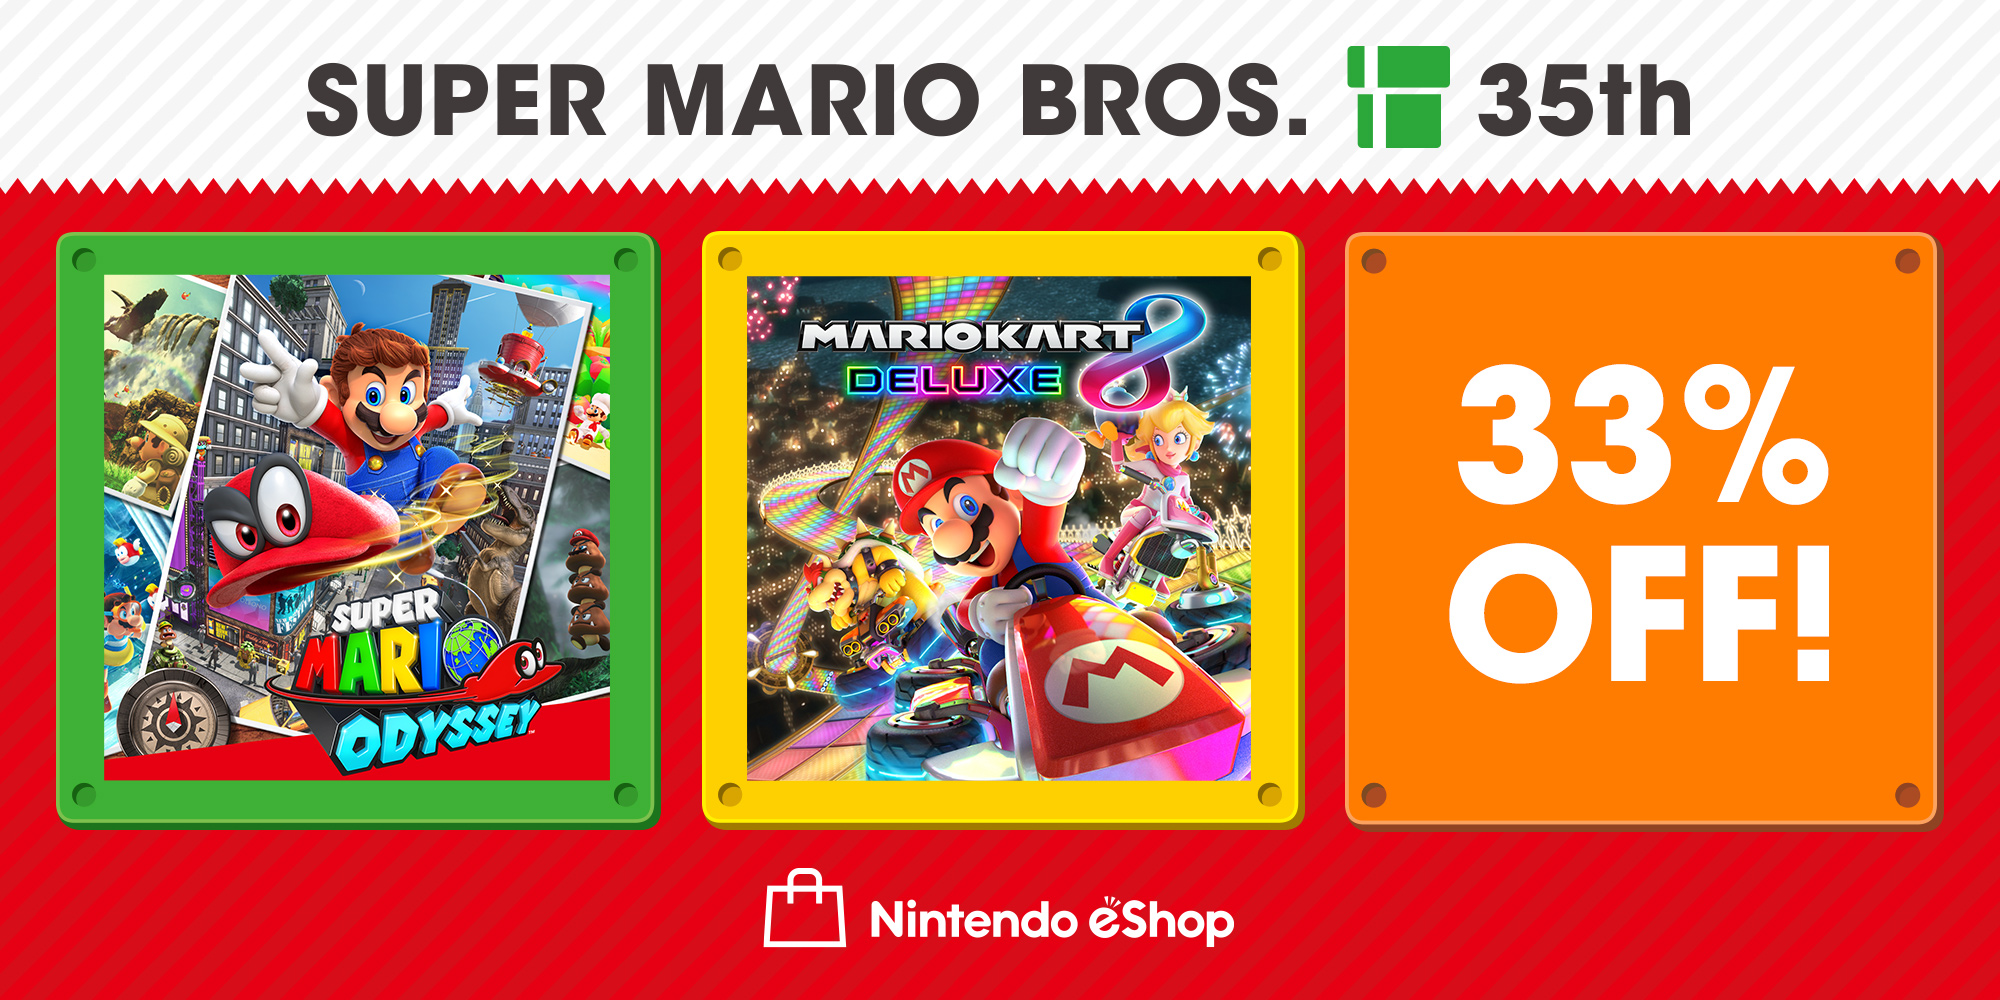 Score 33% off two top Mario titles!